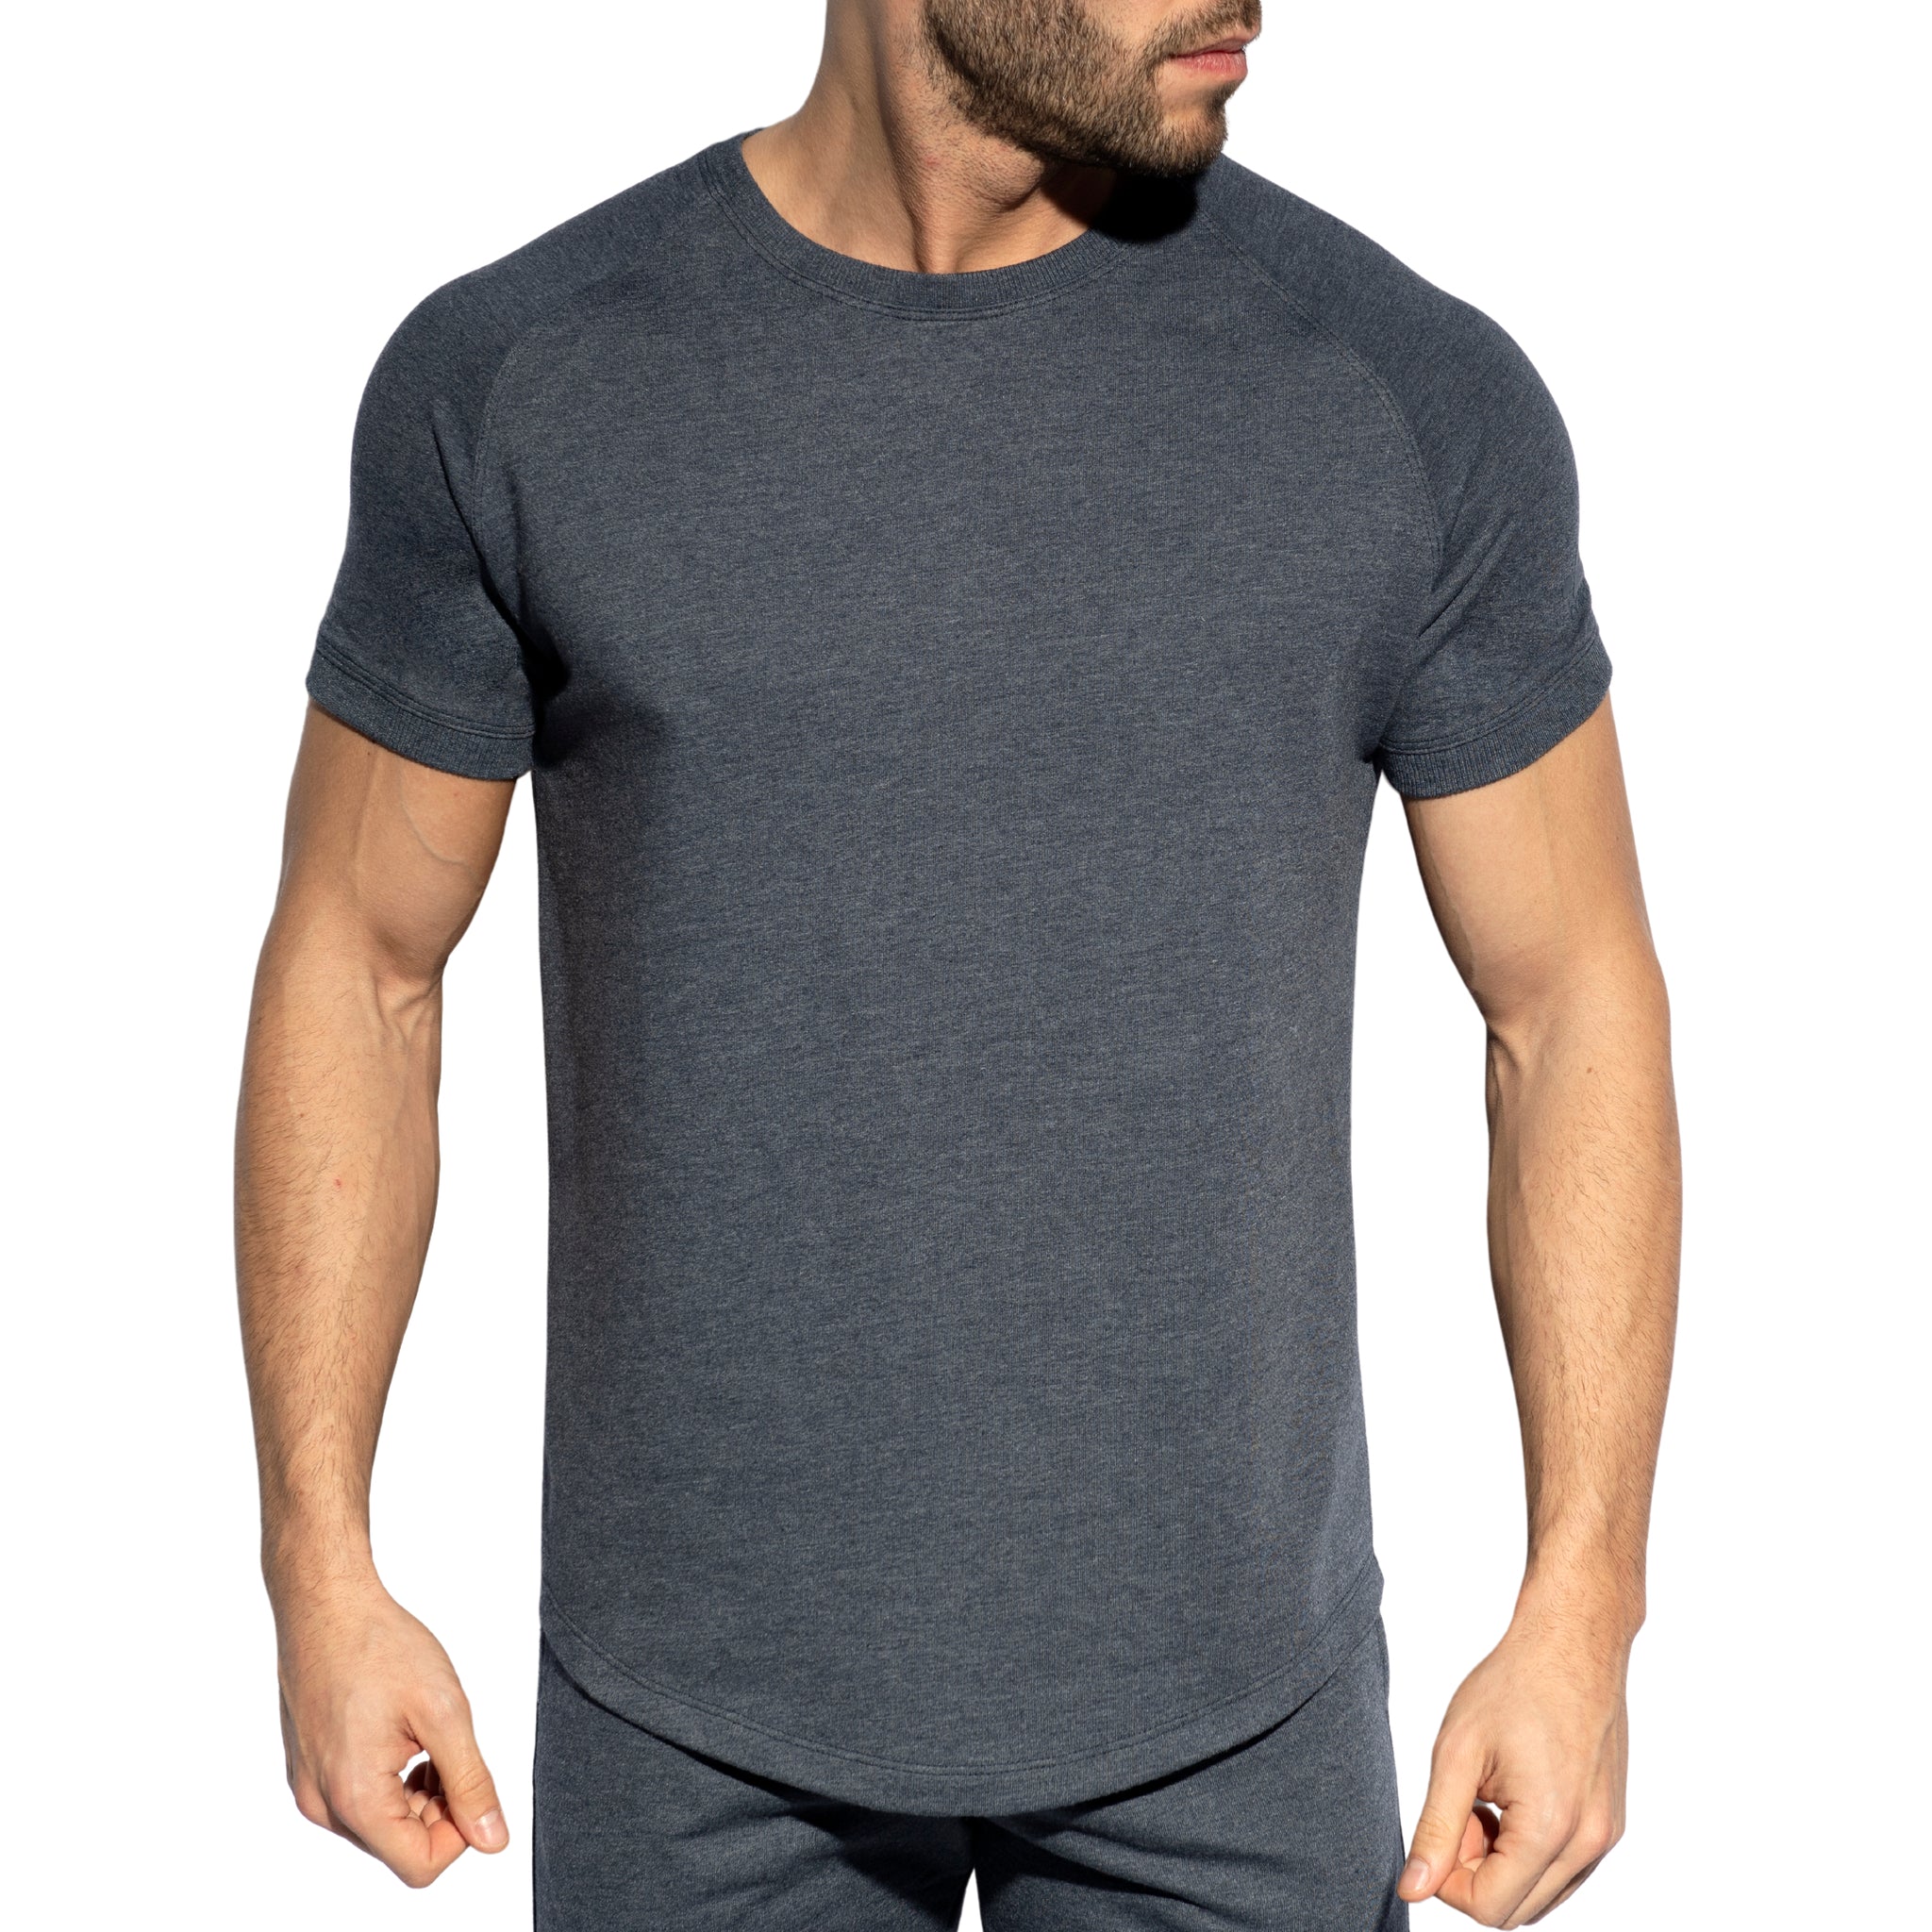 ES Collection Relief Sports T-Shirt Navy SP292